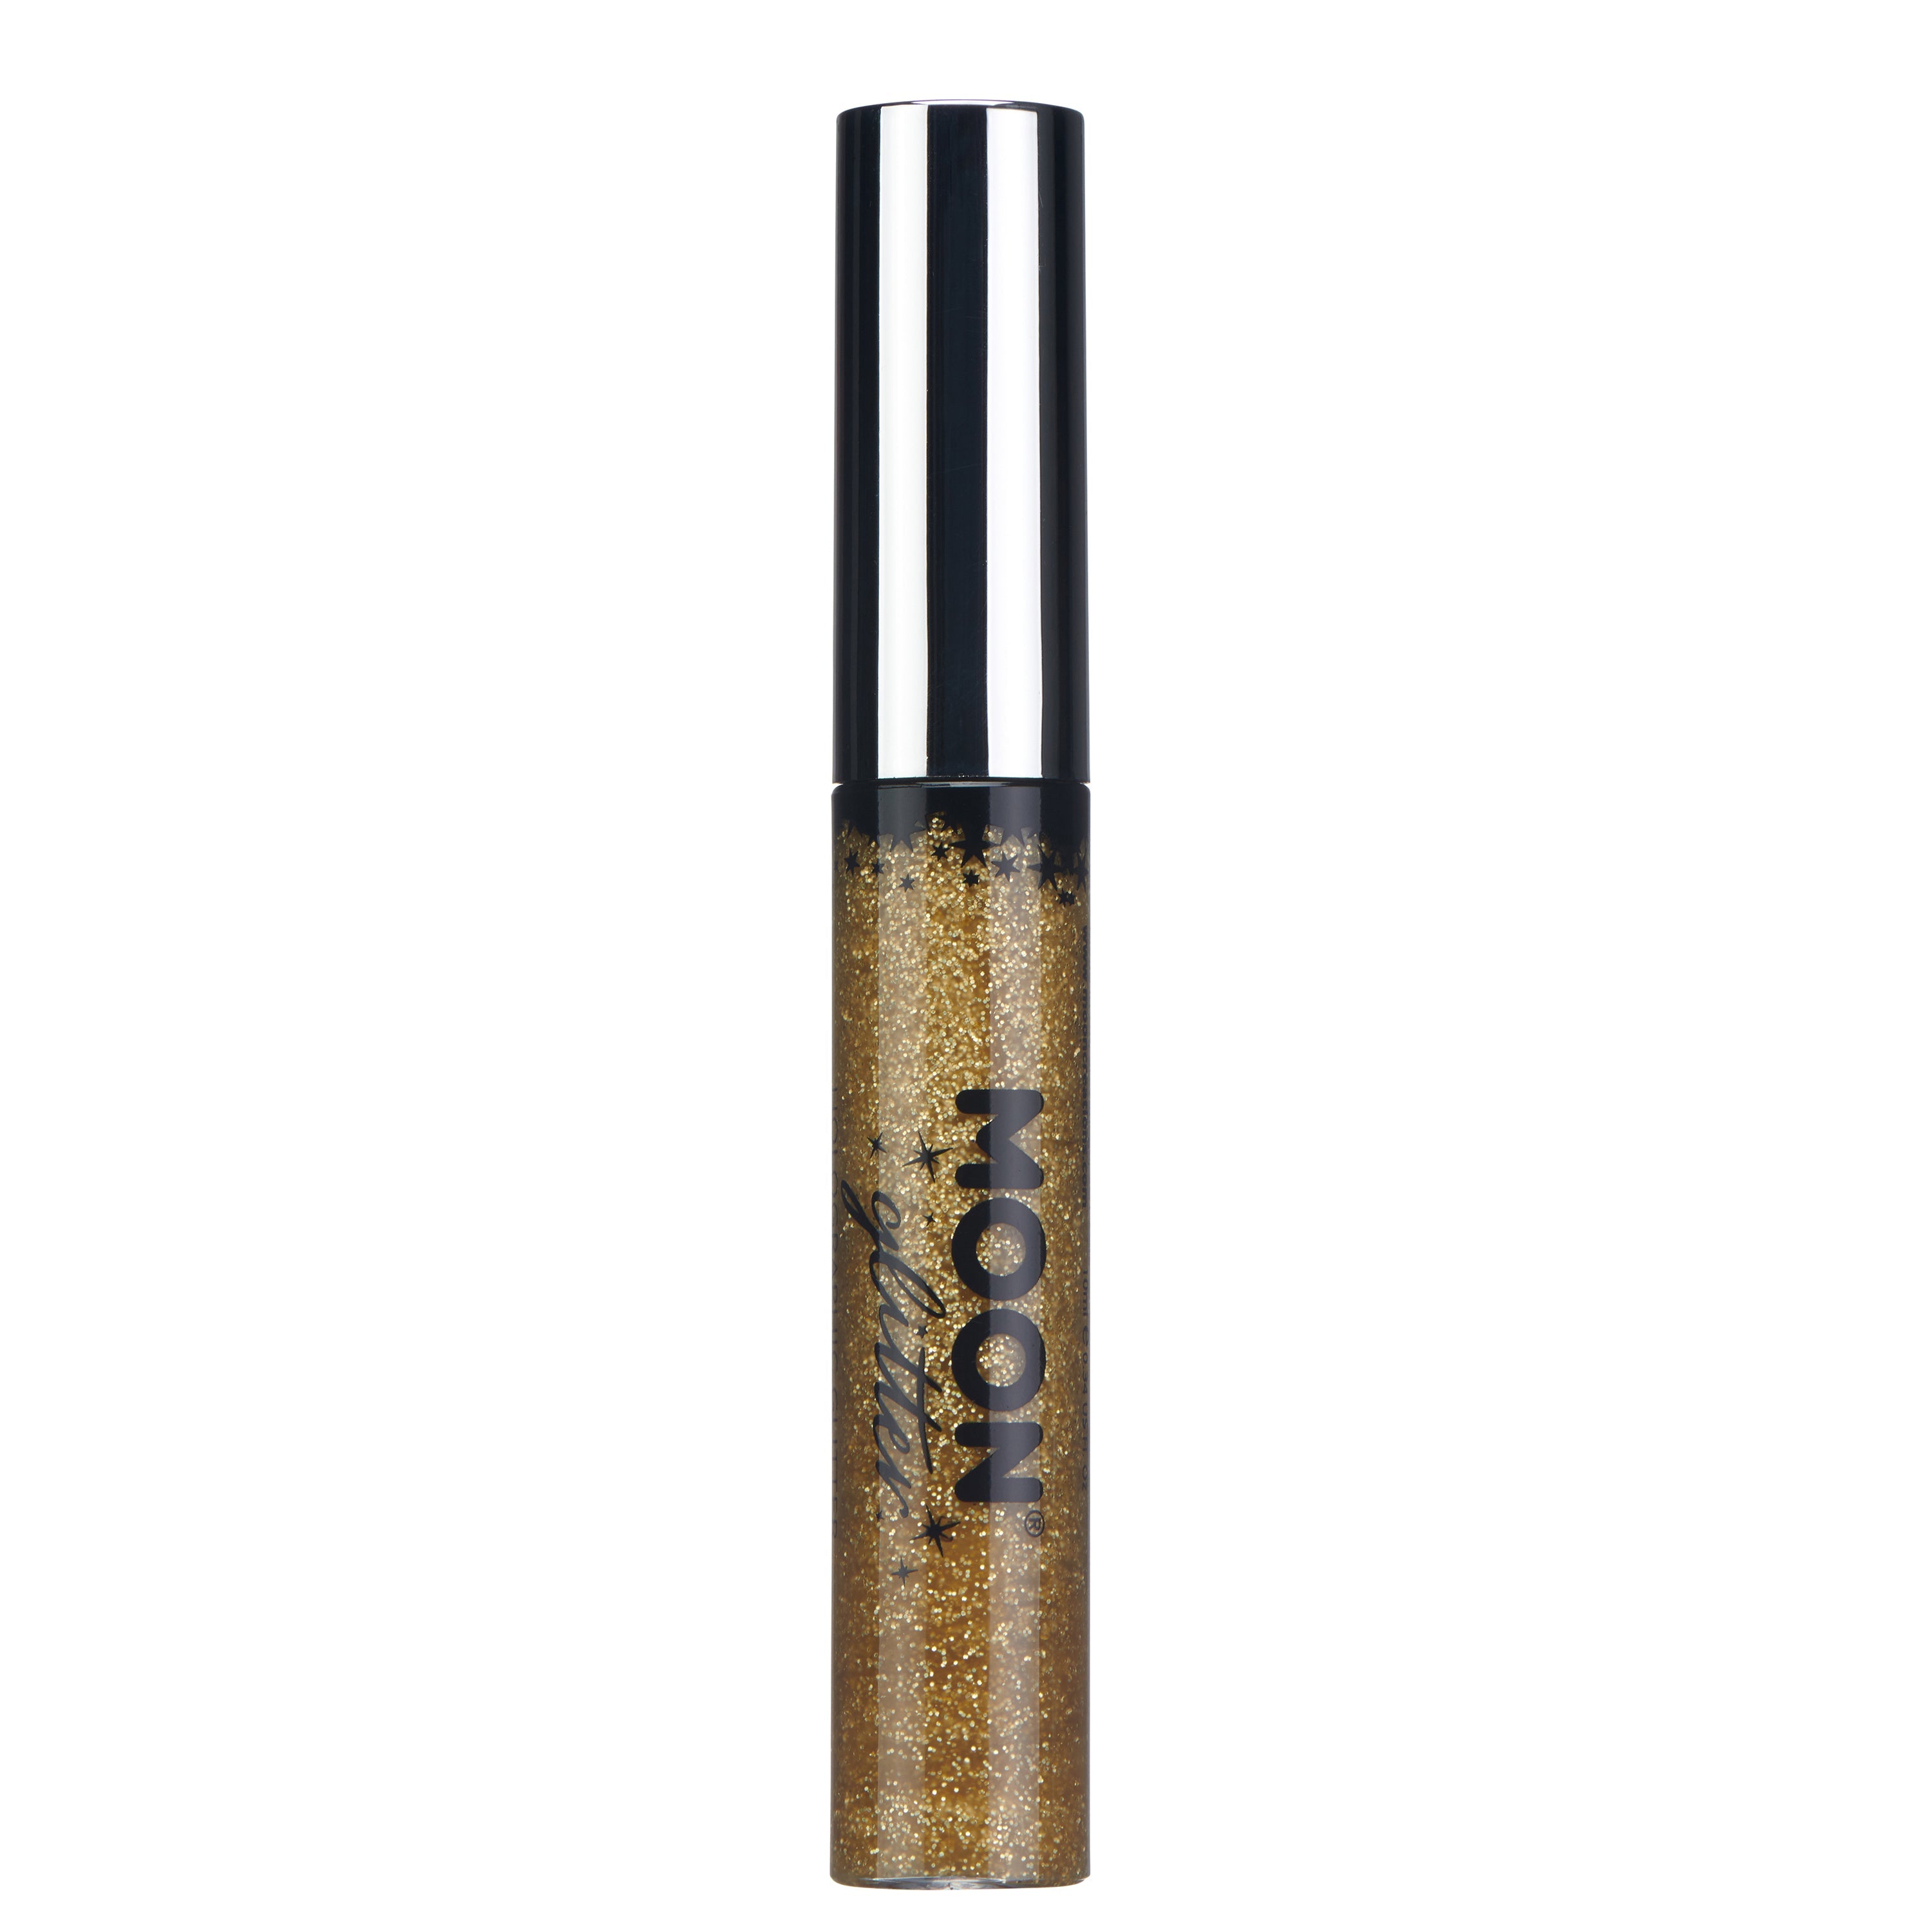 Gold - Holographic Glitter Eyeliner, 10mL. Cosmetically certified, FDA & Health Canada compliant, cruelty free and vegan.